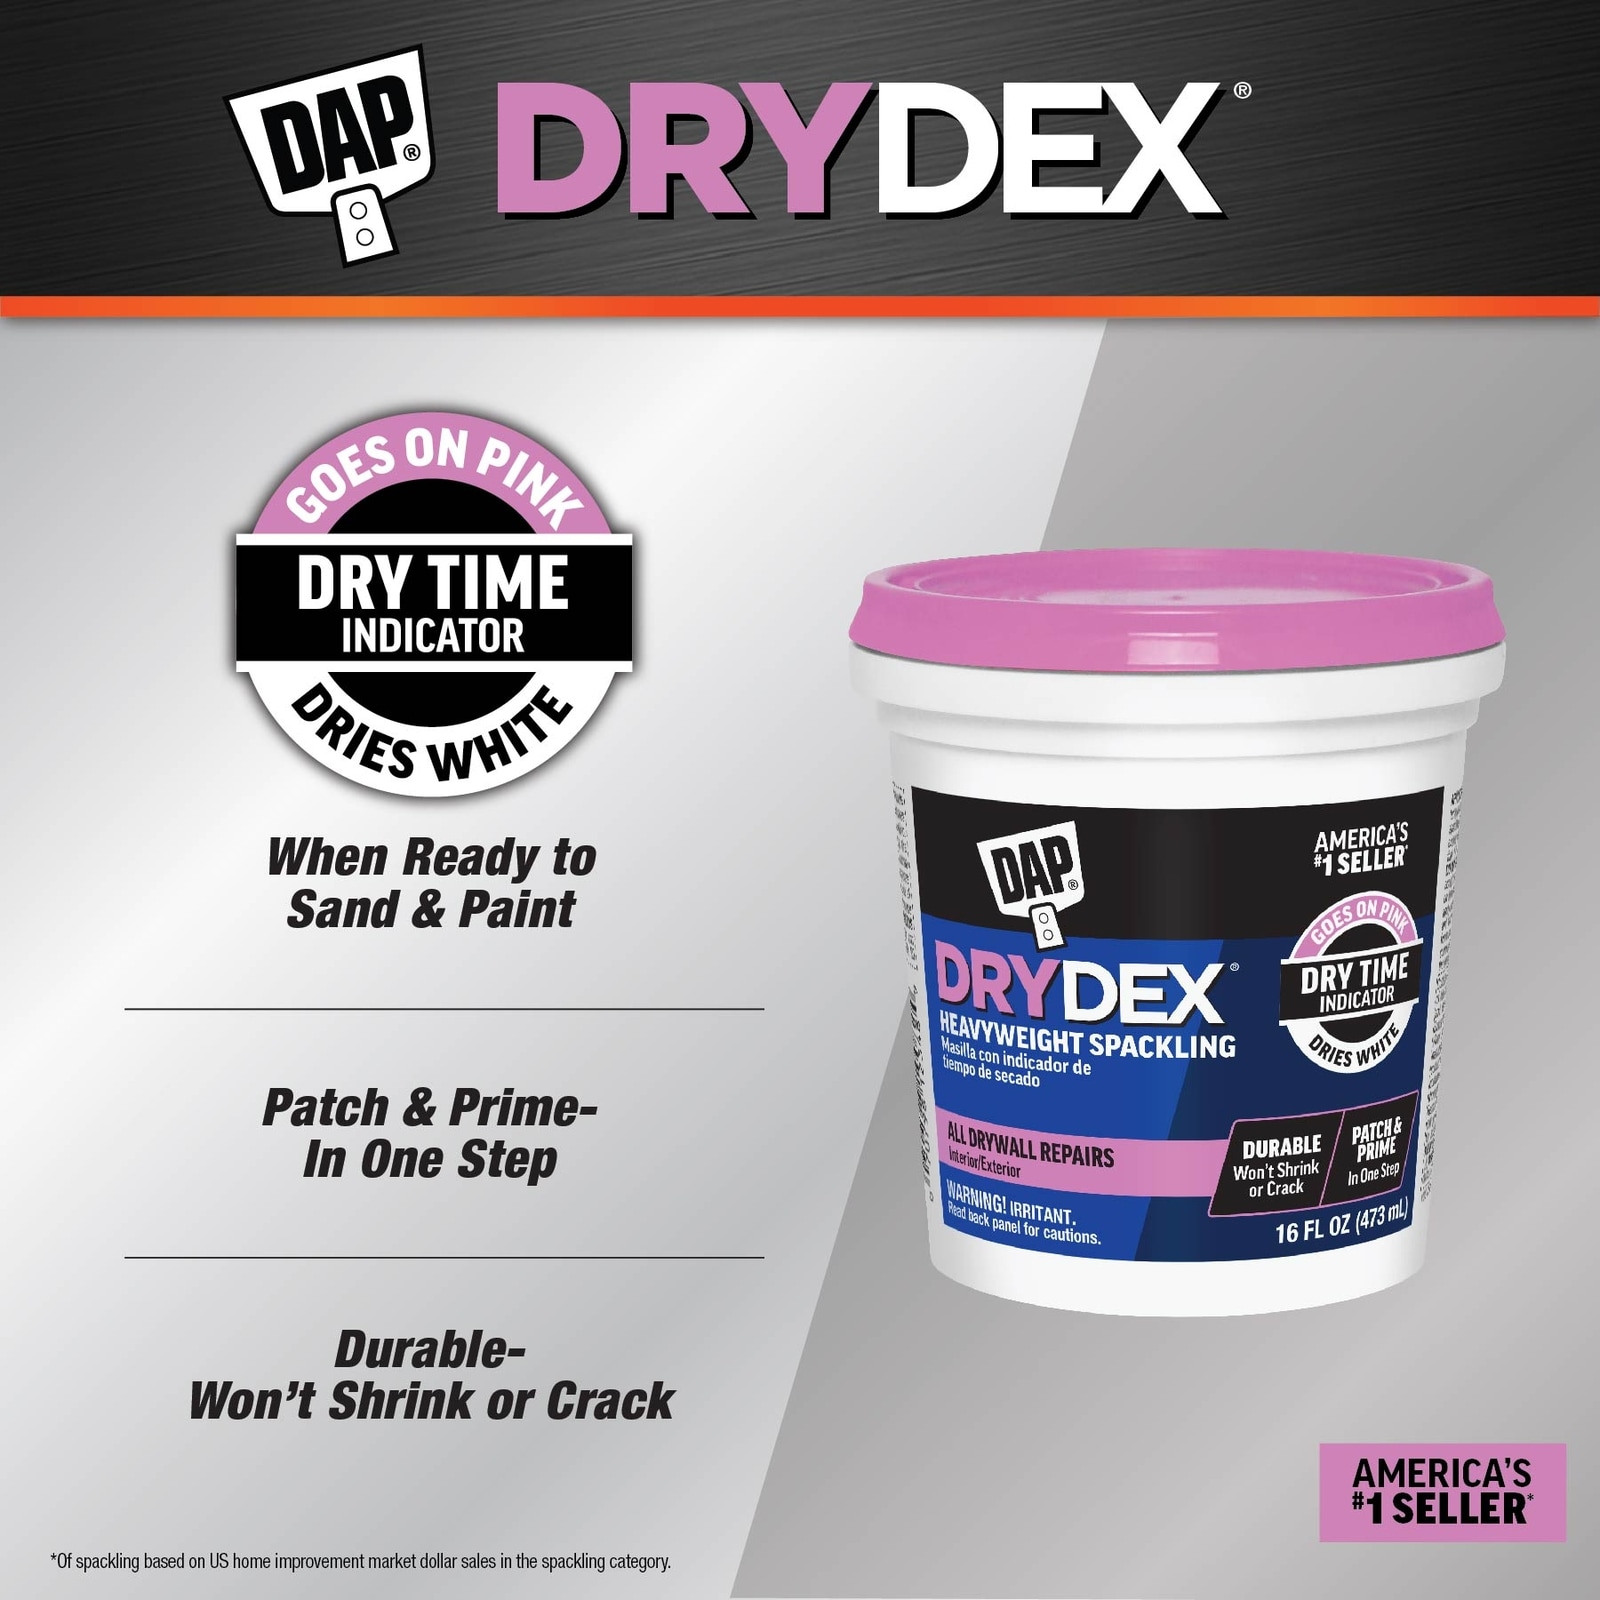 DAP DryDex Spackling Color Changing Wall Repair Patch 4 piece Kit - 8 oz.  NEW